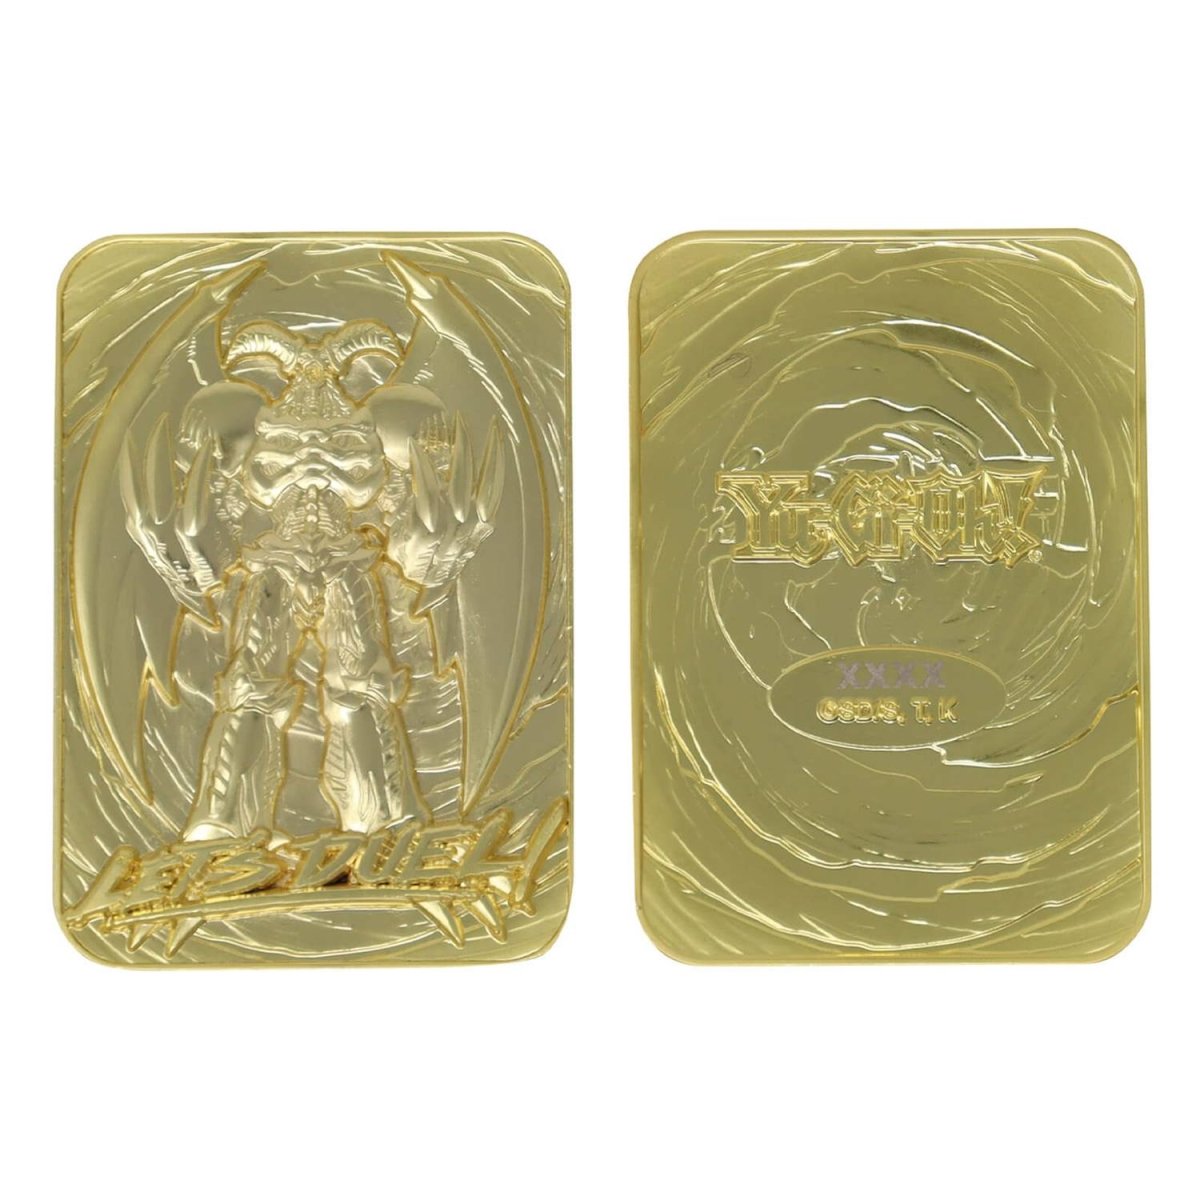 Yu-Gi-Oh! Summoned Skull - 24k Gold Plated Limited Edition Ingot - GameOn.games